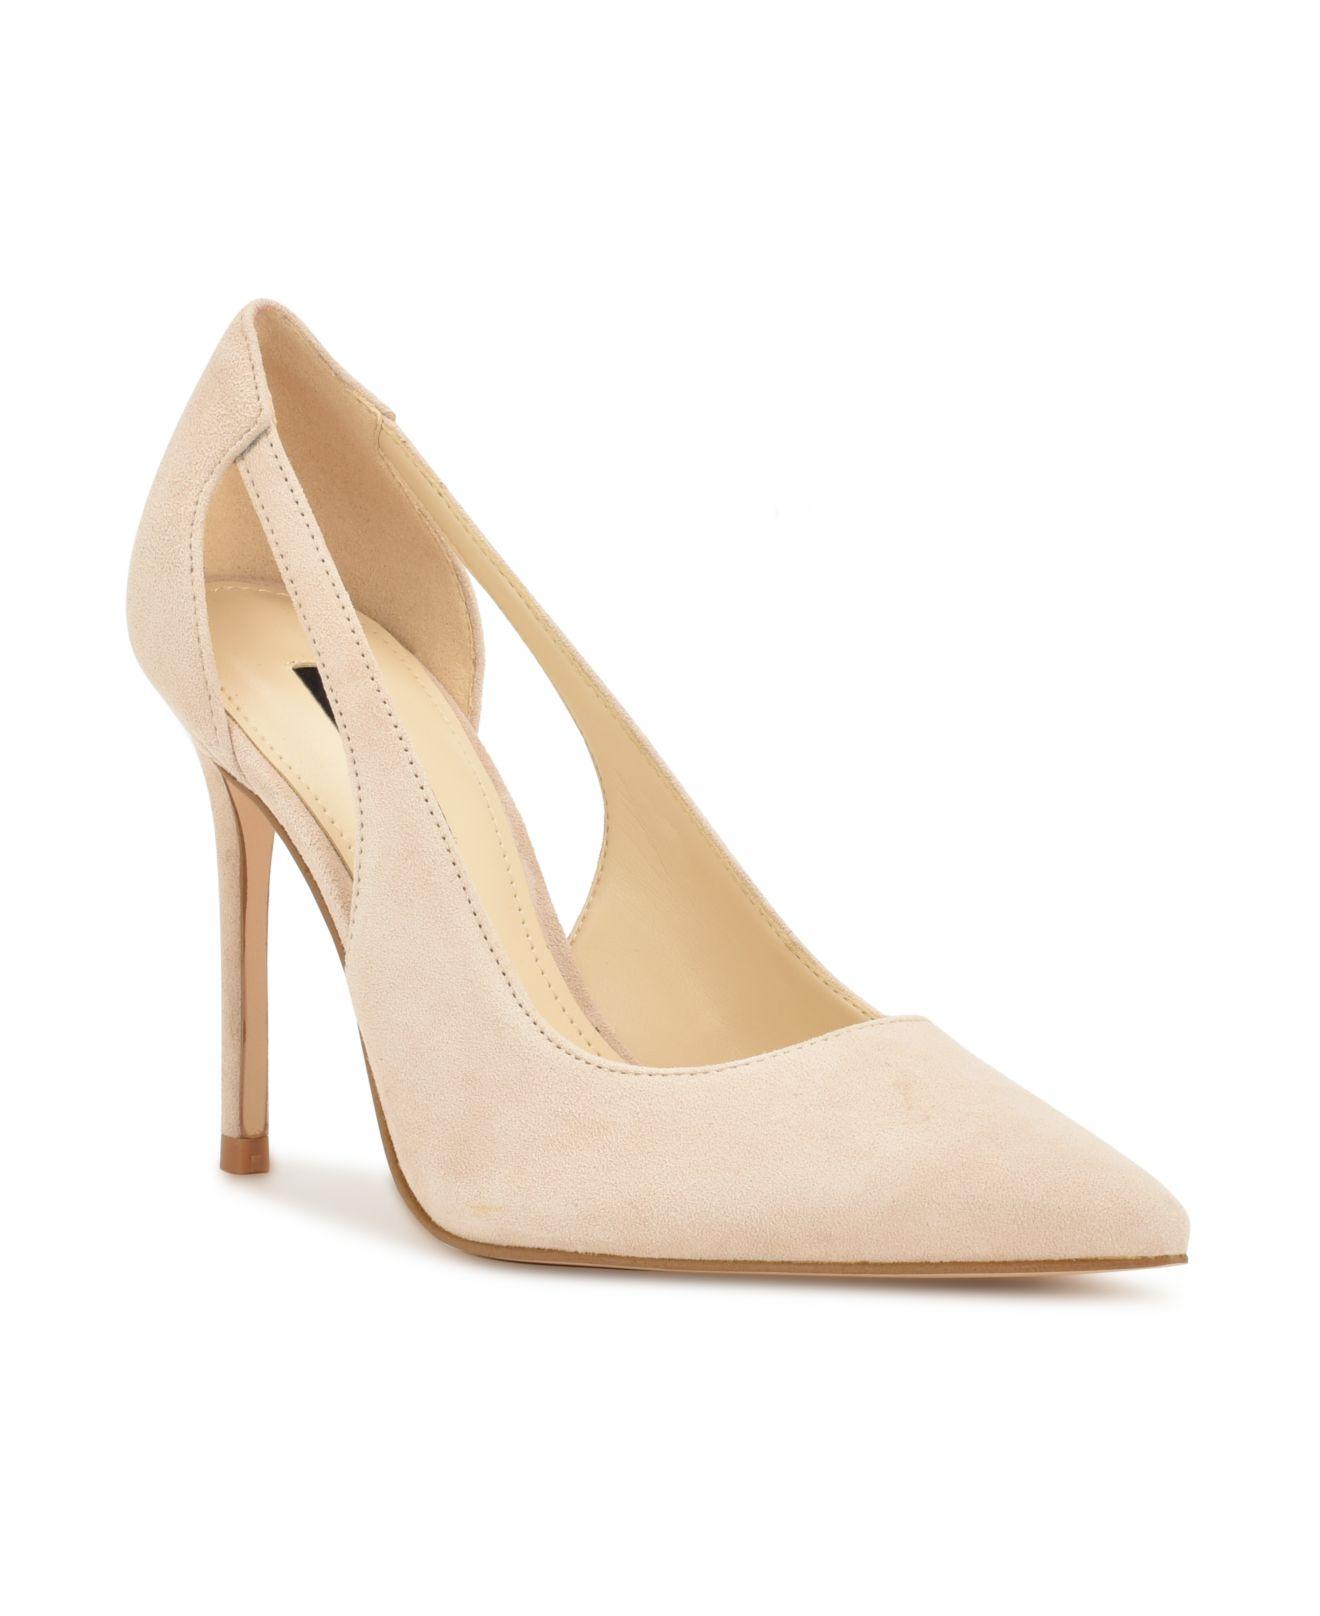 Nine West Favon Pointy Toe Stiletto Dress Pumps in Natural | Lyst